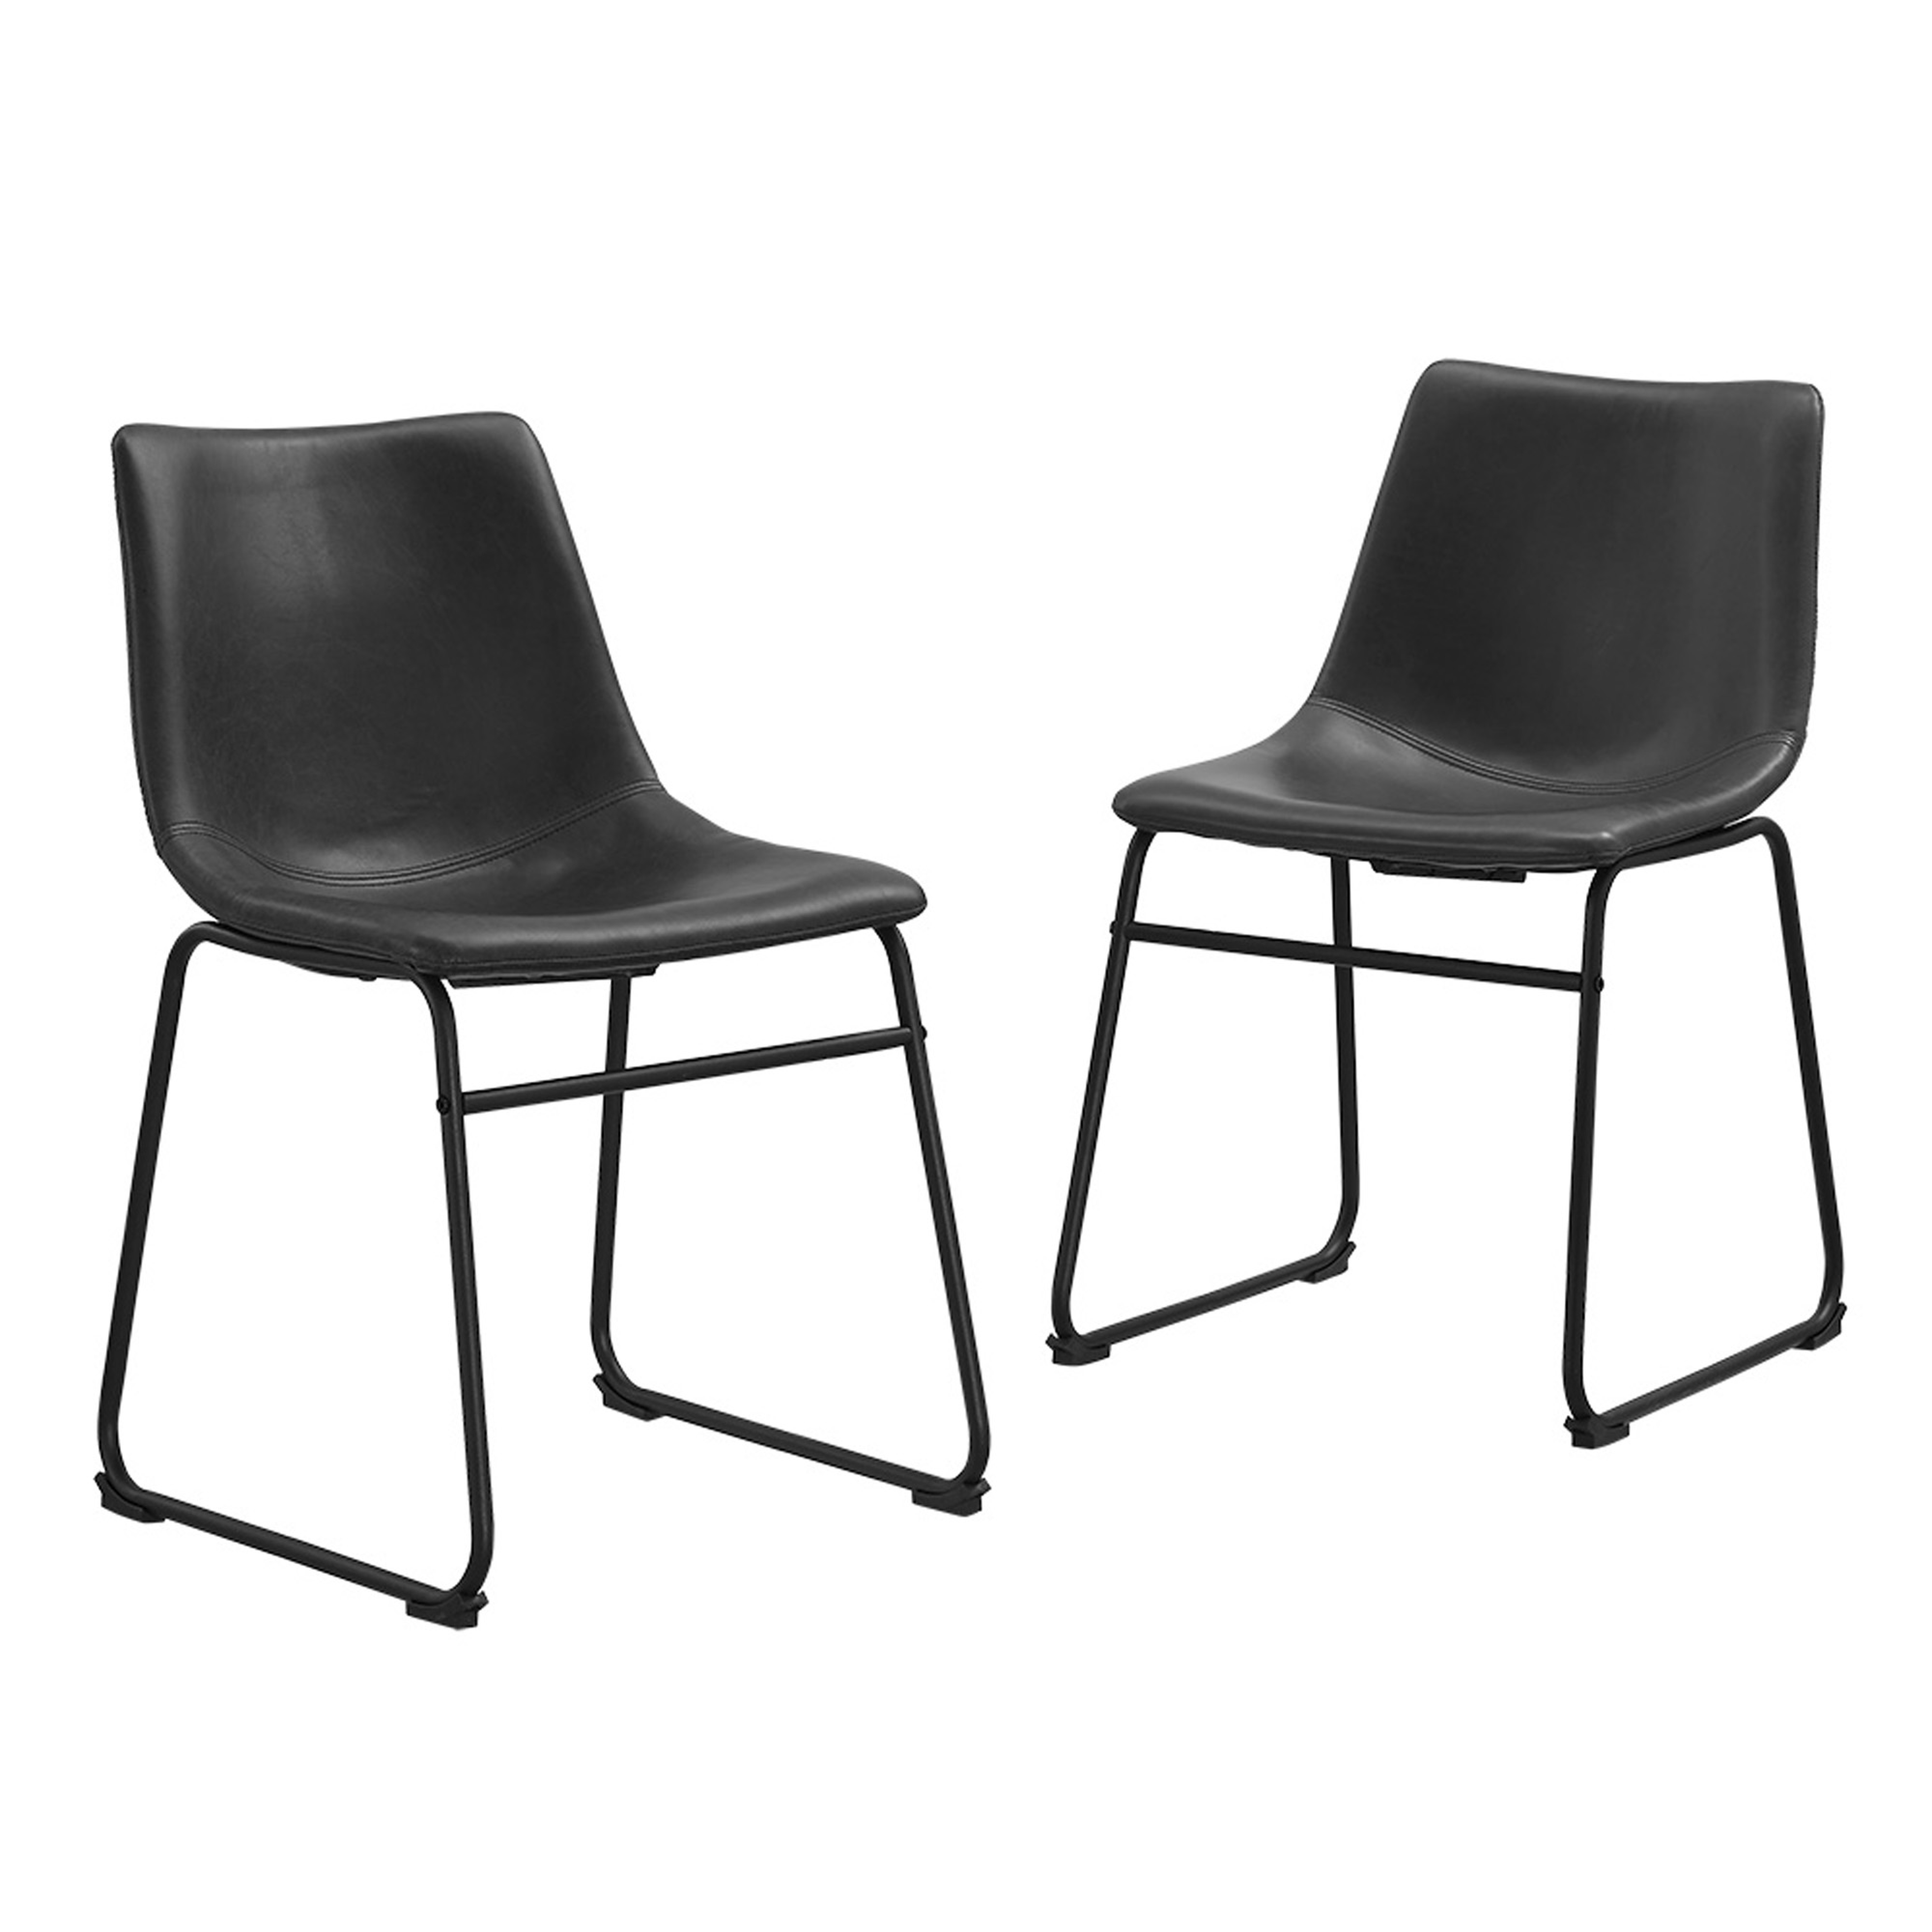 18" Industrial Faux Leather Dining Chair, Set of 2 - Black - Contour & Co.